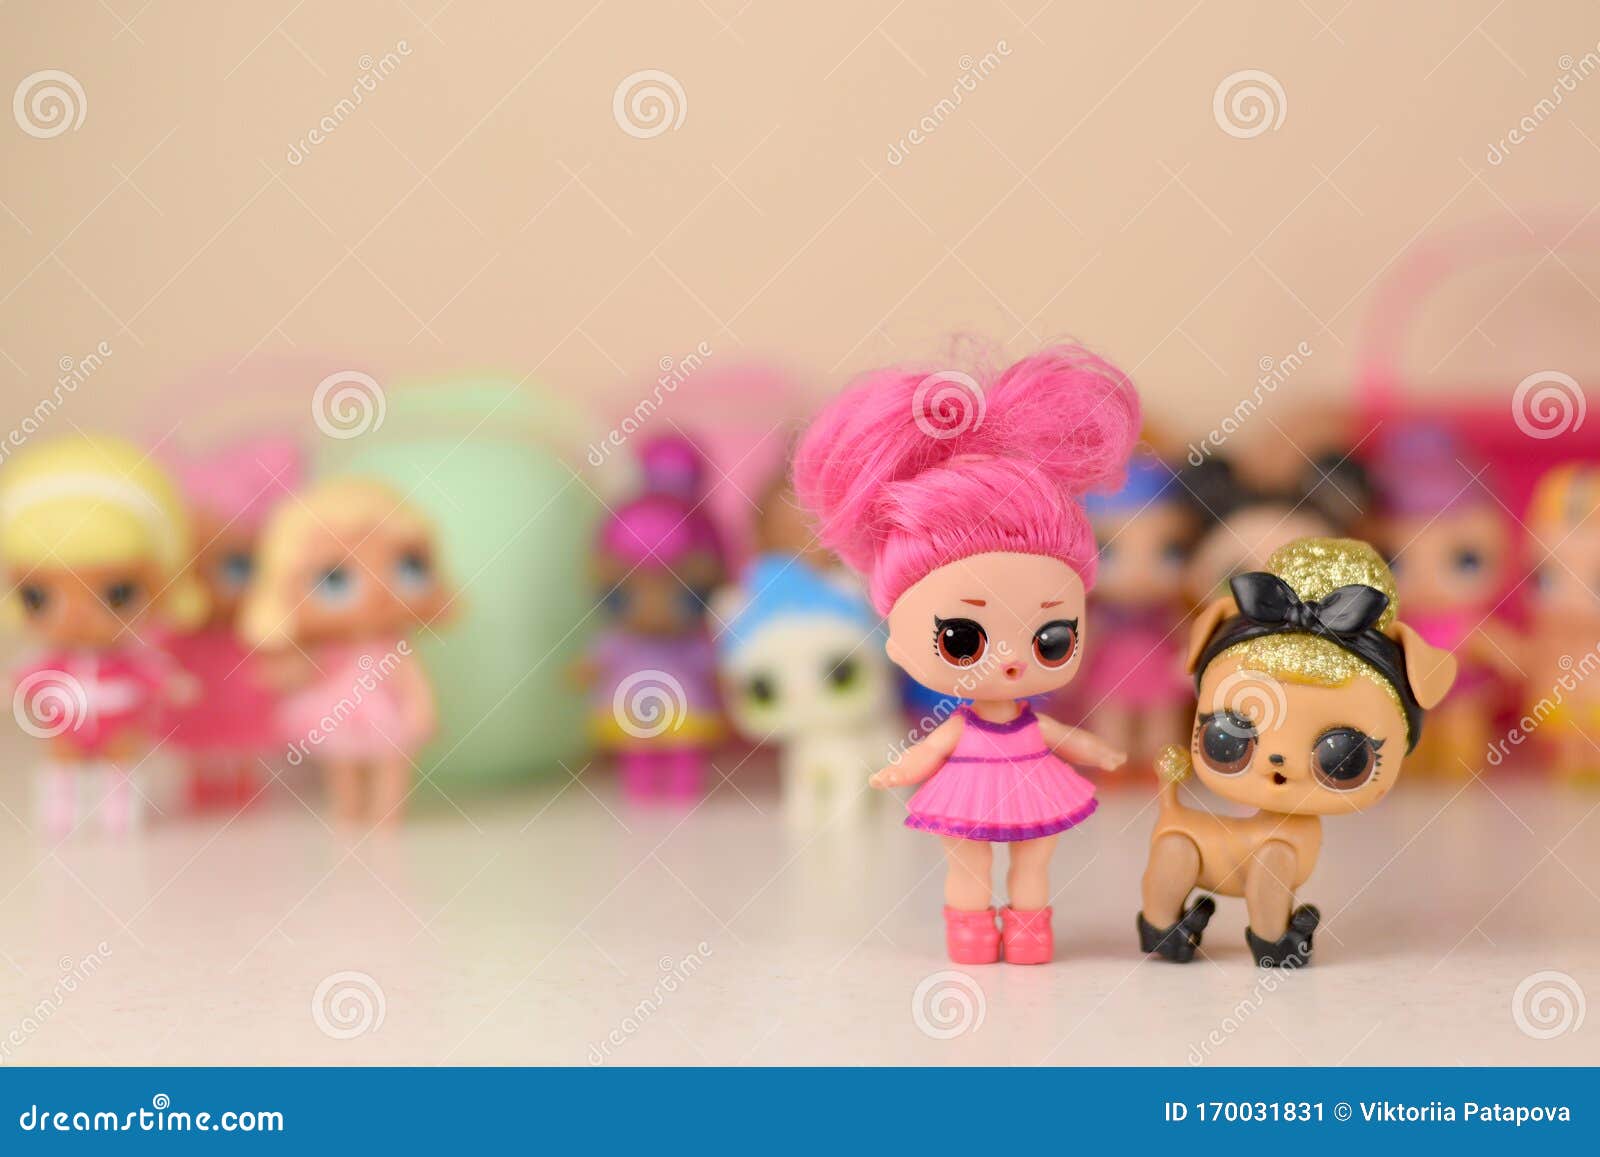 Many Colorful Plastic LOL Dolls on Table. LOL Surprise Series Toys  Manufactured by MGA Entertainment Inc Editorial Photo - Image of little,  pastel: 170031831